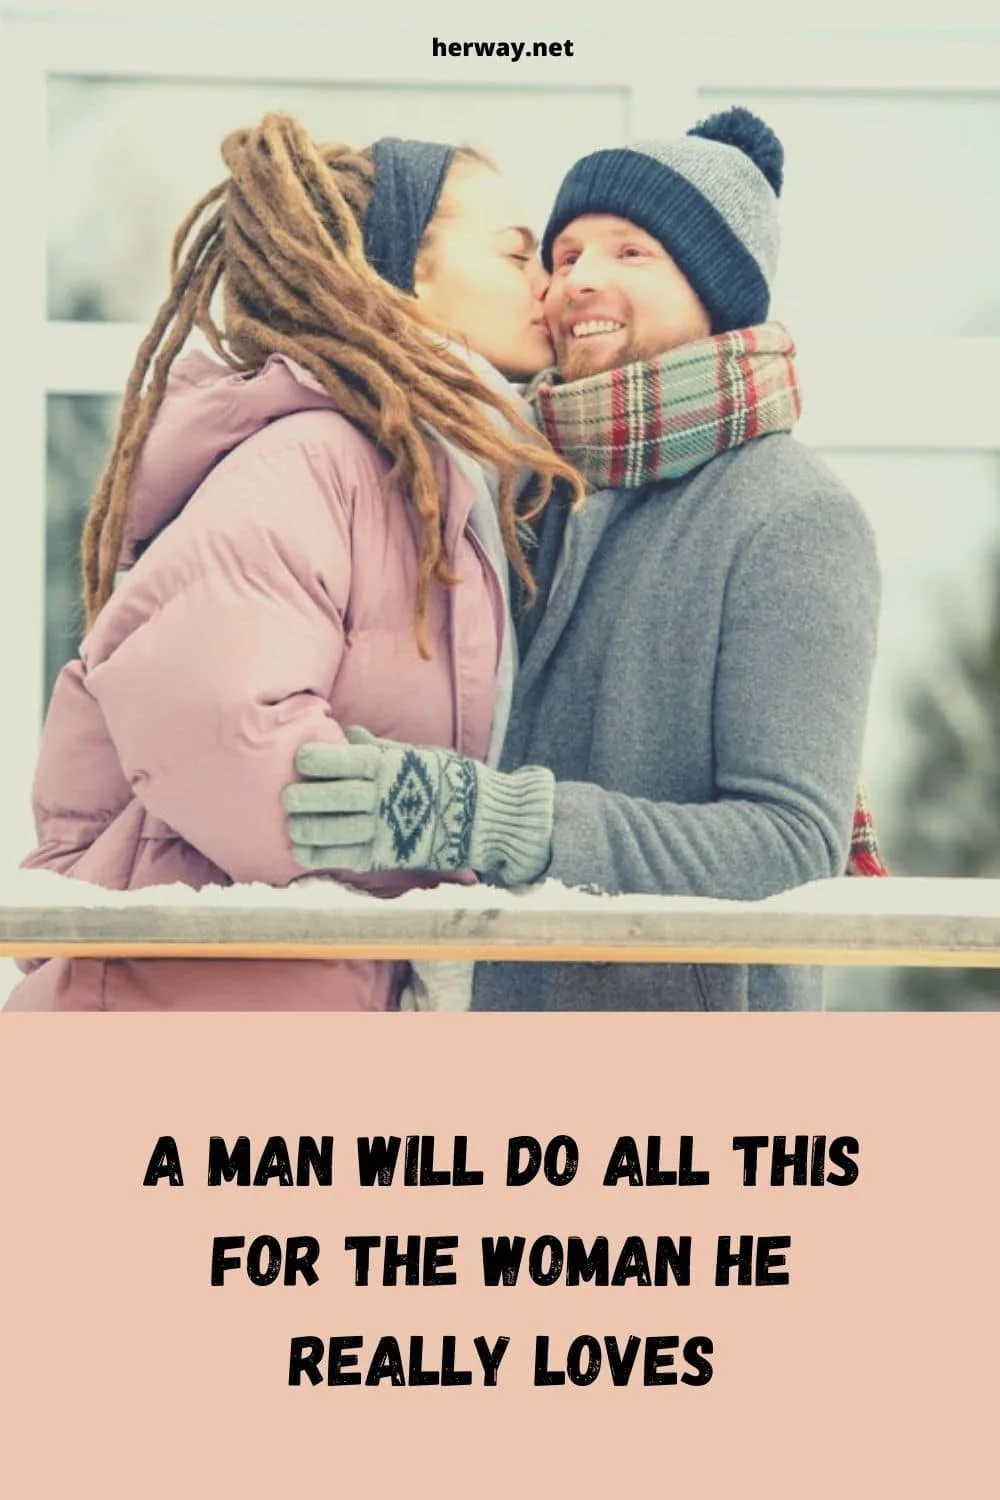 A Man Will Do ALL THIS for the Woman He really Loves